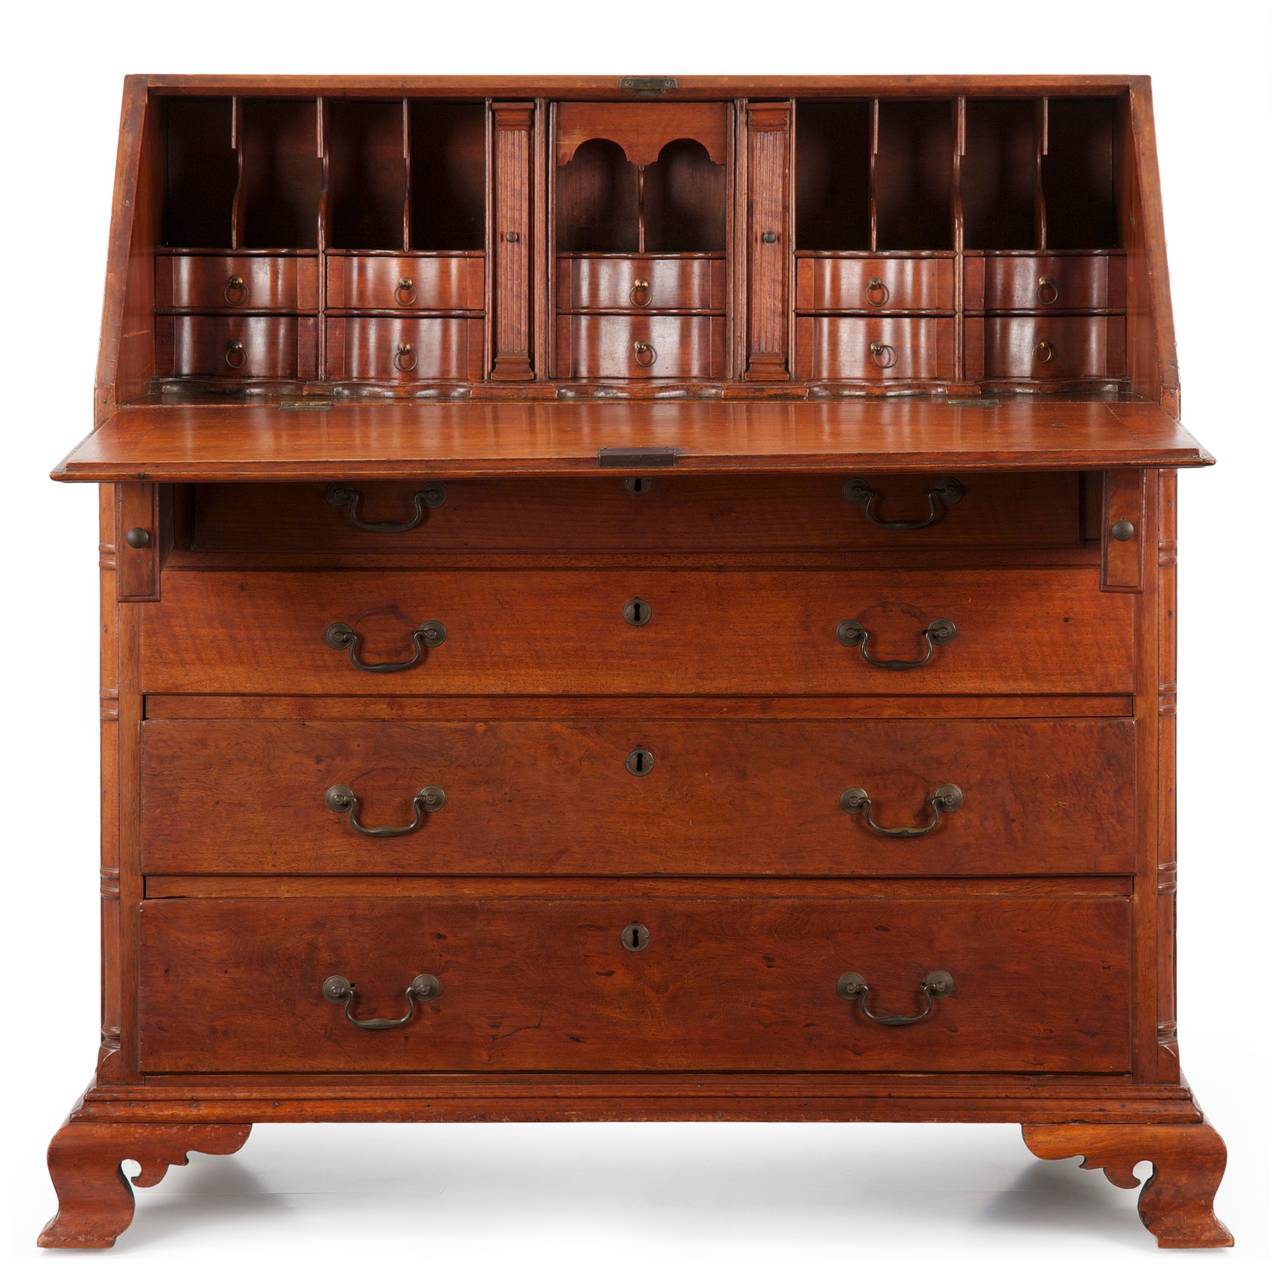 Early 19th Century American Chippendale Walnut Antique Slant Front Desk, Chester County, PA c. 1807